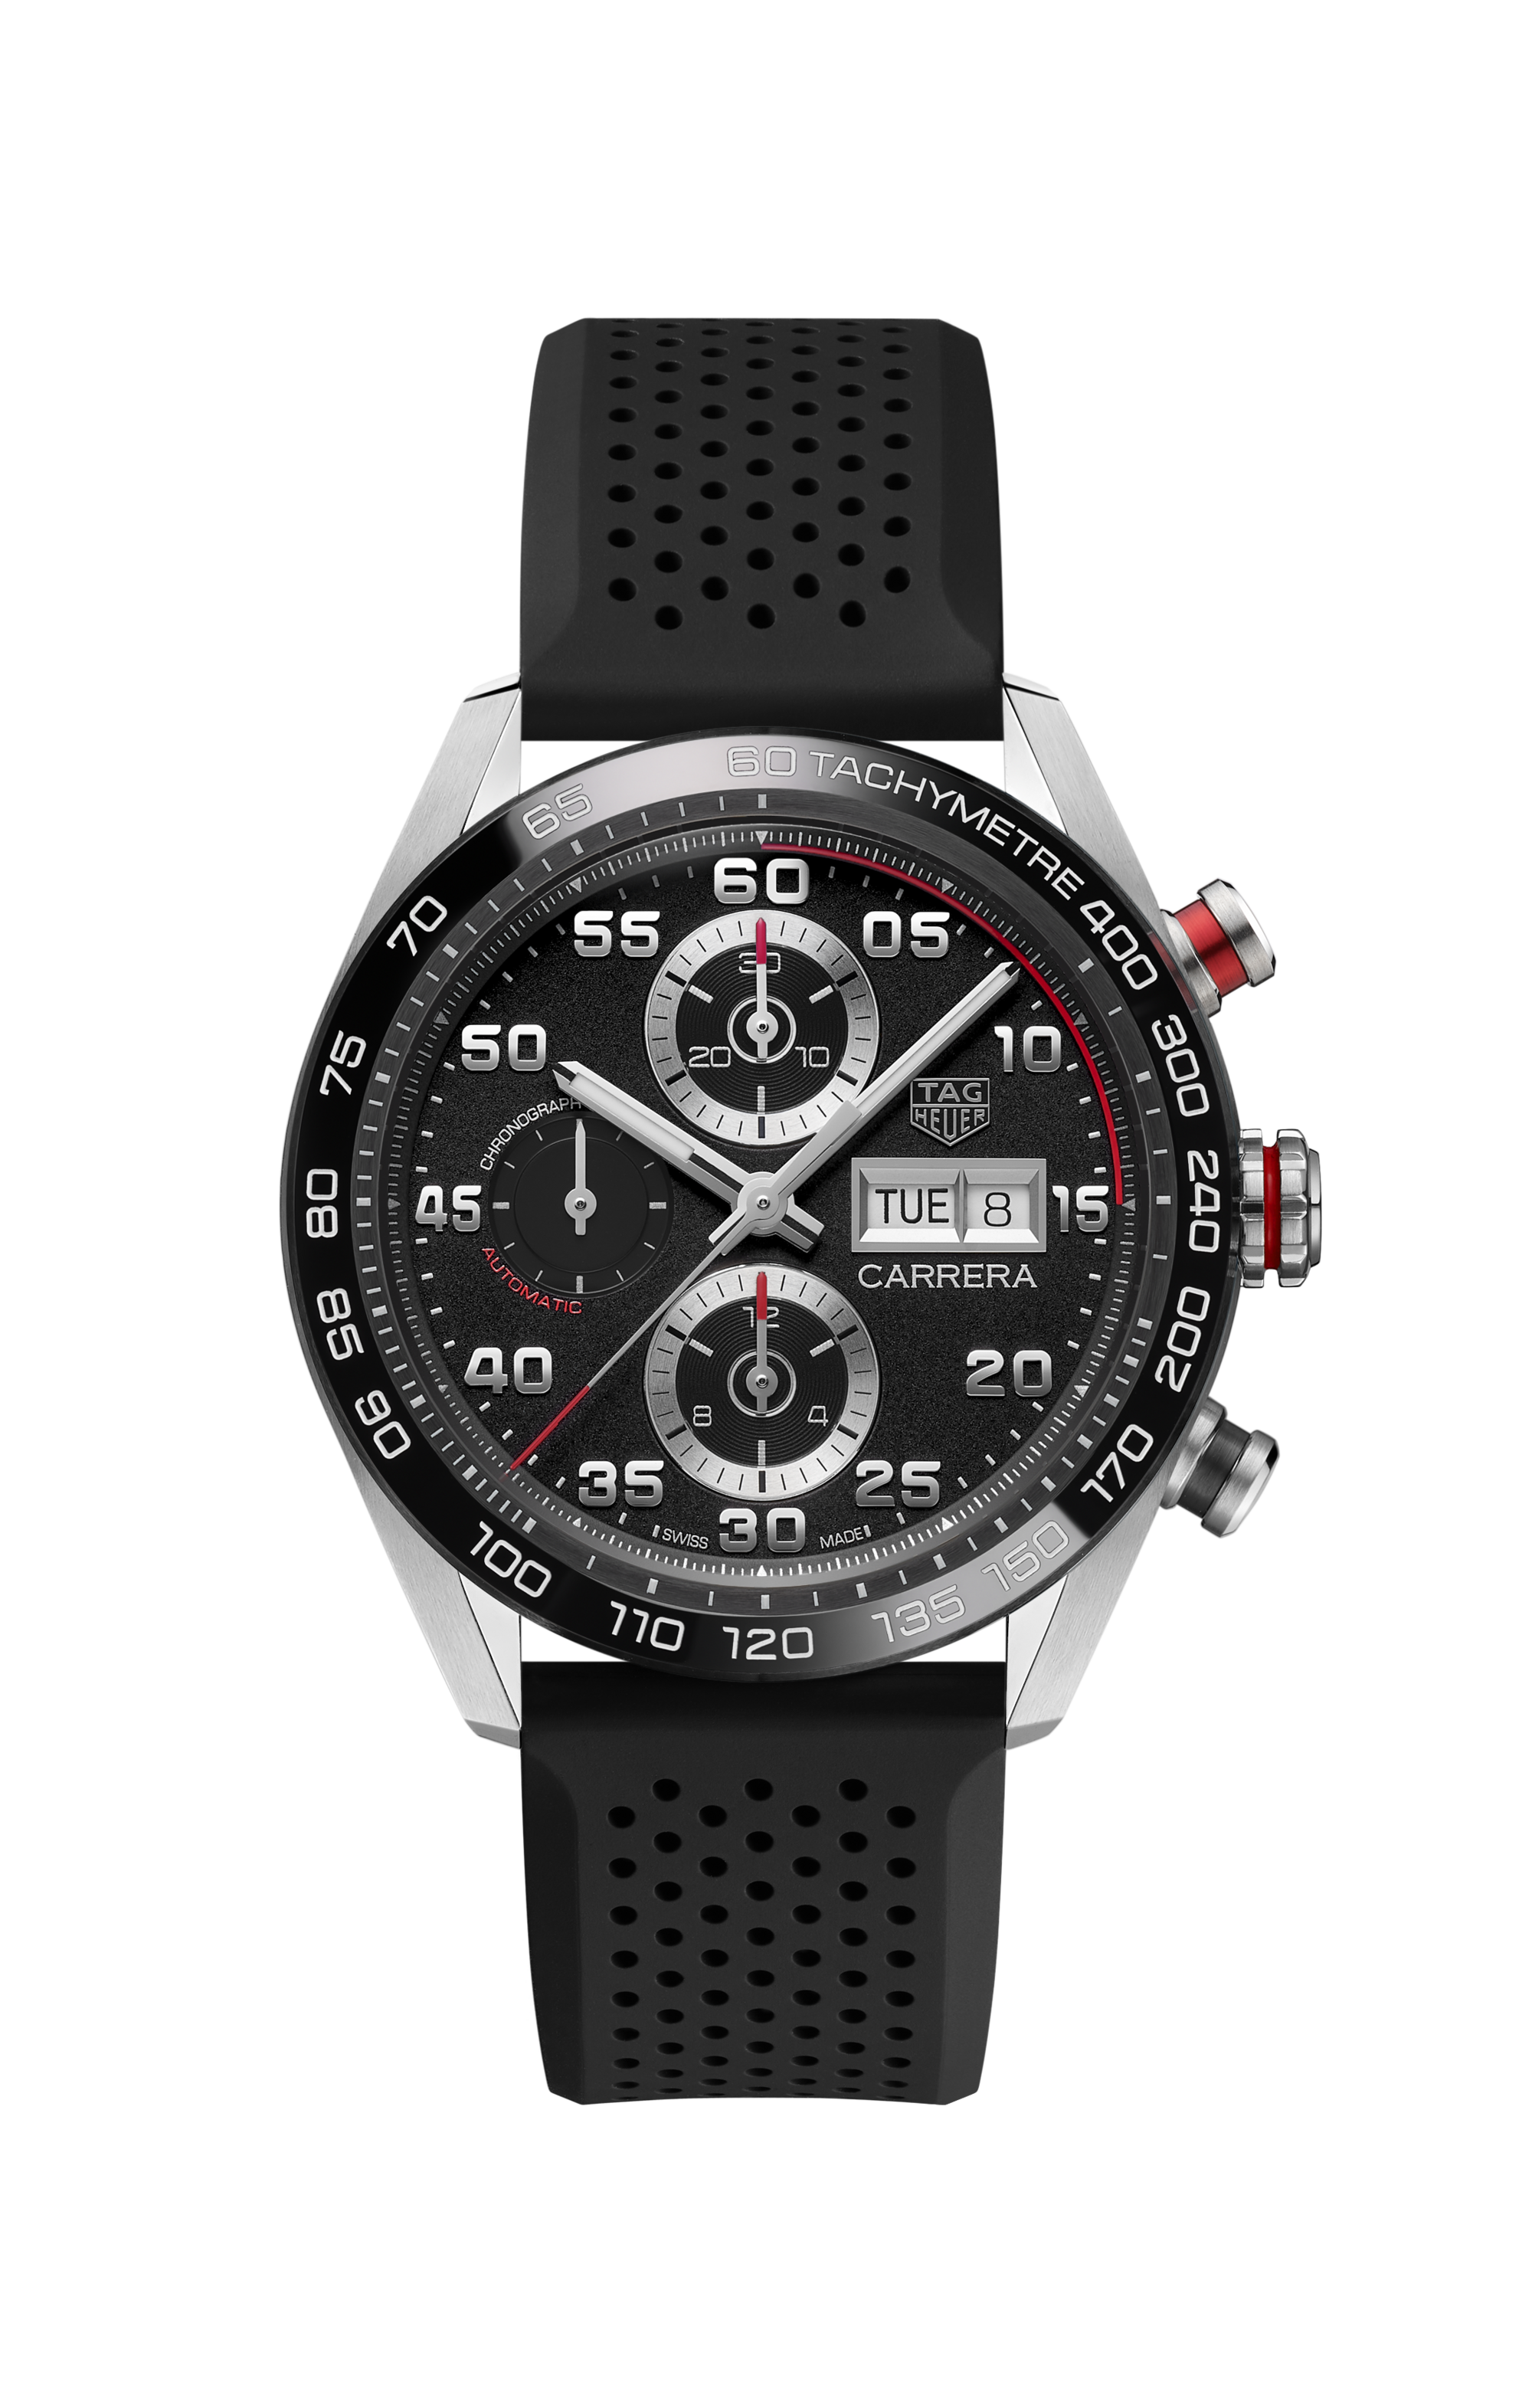 Tag Heuer Grand Carrera Pendulum Concept | Tag heuer, Watches for men,  Swiss luxury watches